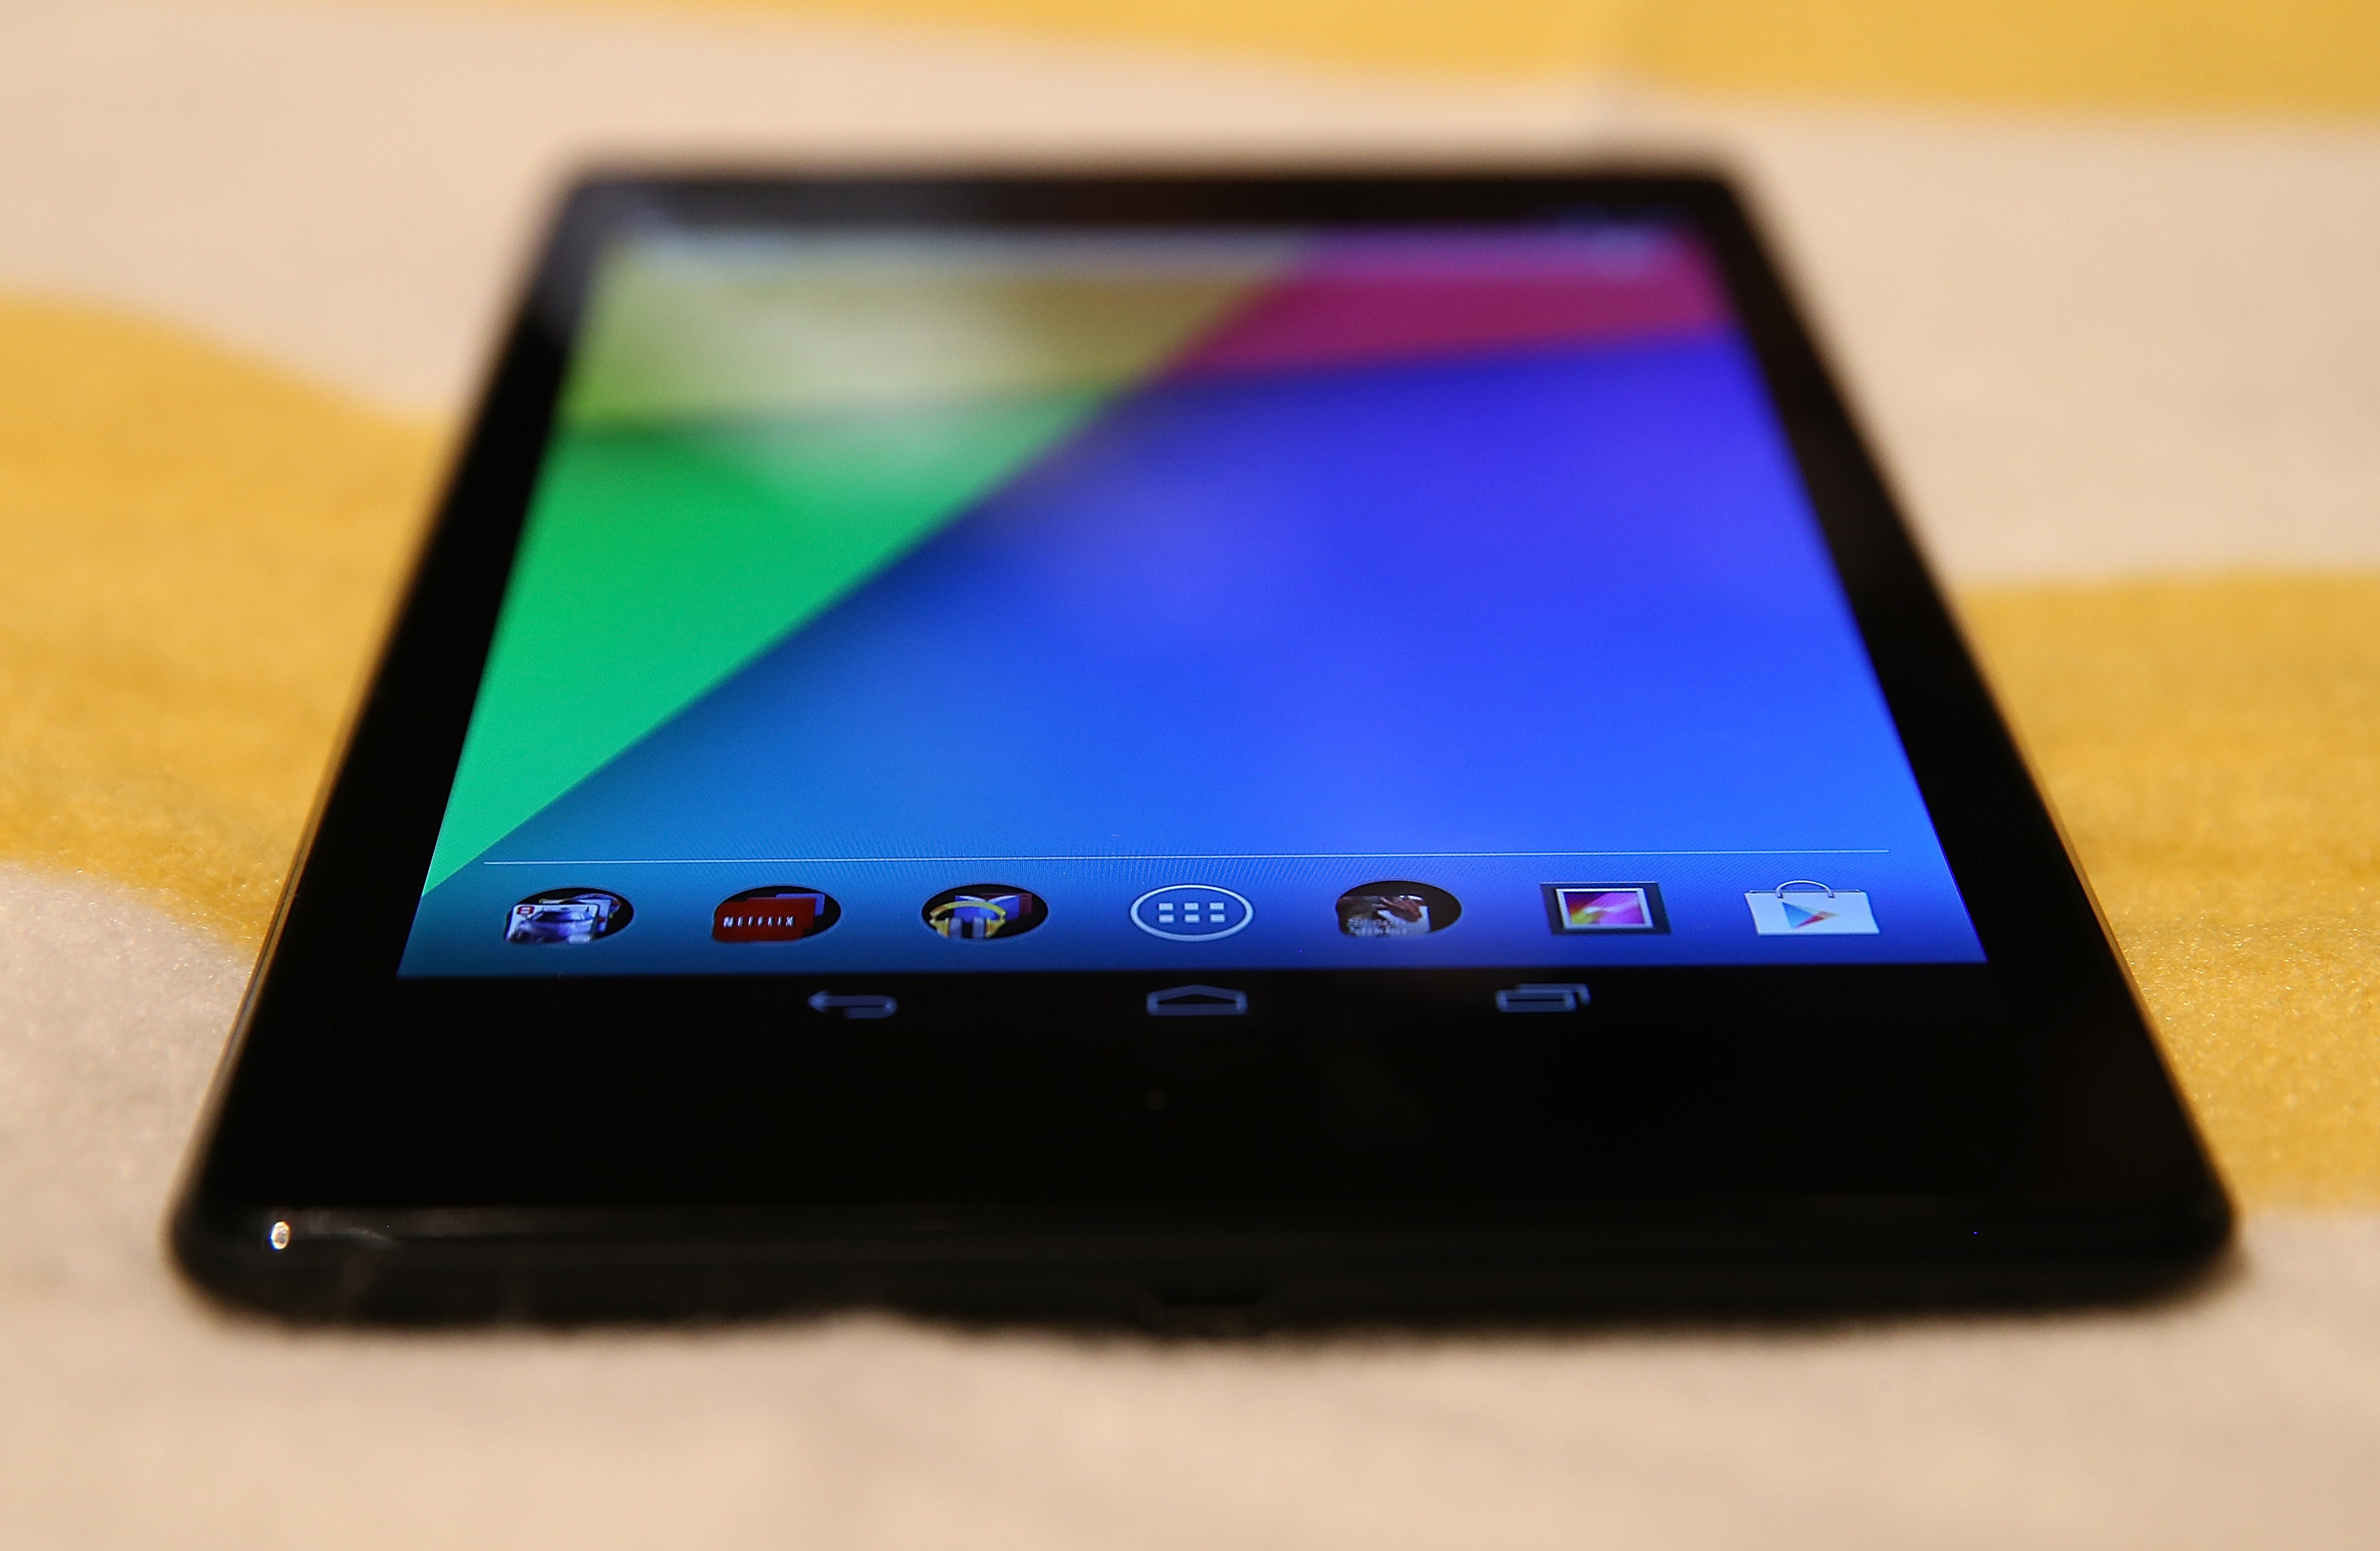 The new Google Nexus 7 tablet, made by Asus is displayed during a Google special event at Dogpatch Studios on July 24, 2013 in San Francisco, California. (Justin Sullivan&mdash;Getty Images)